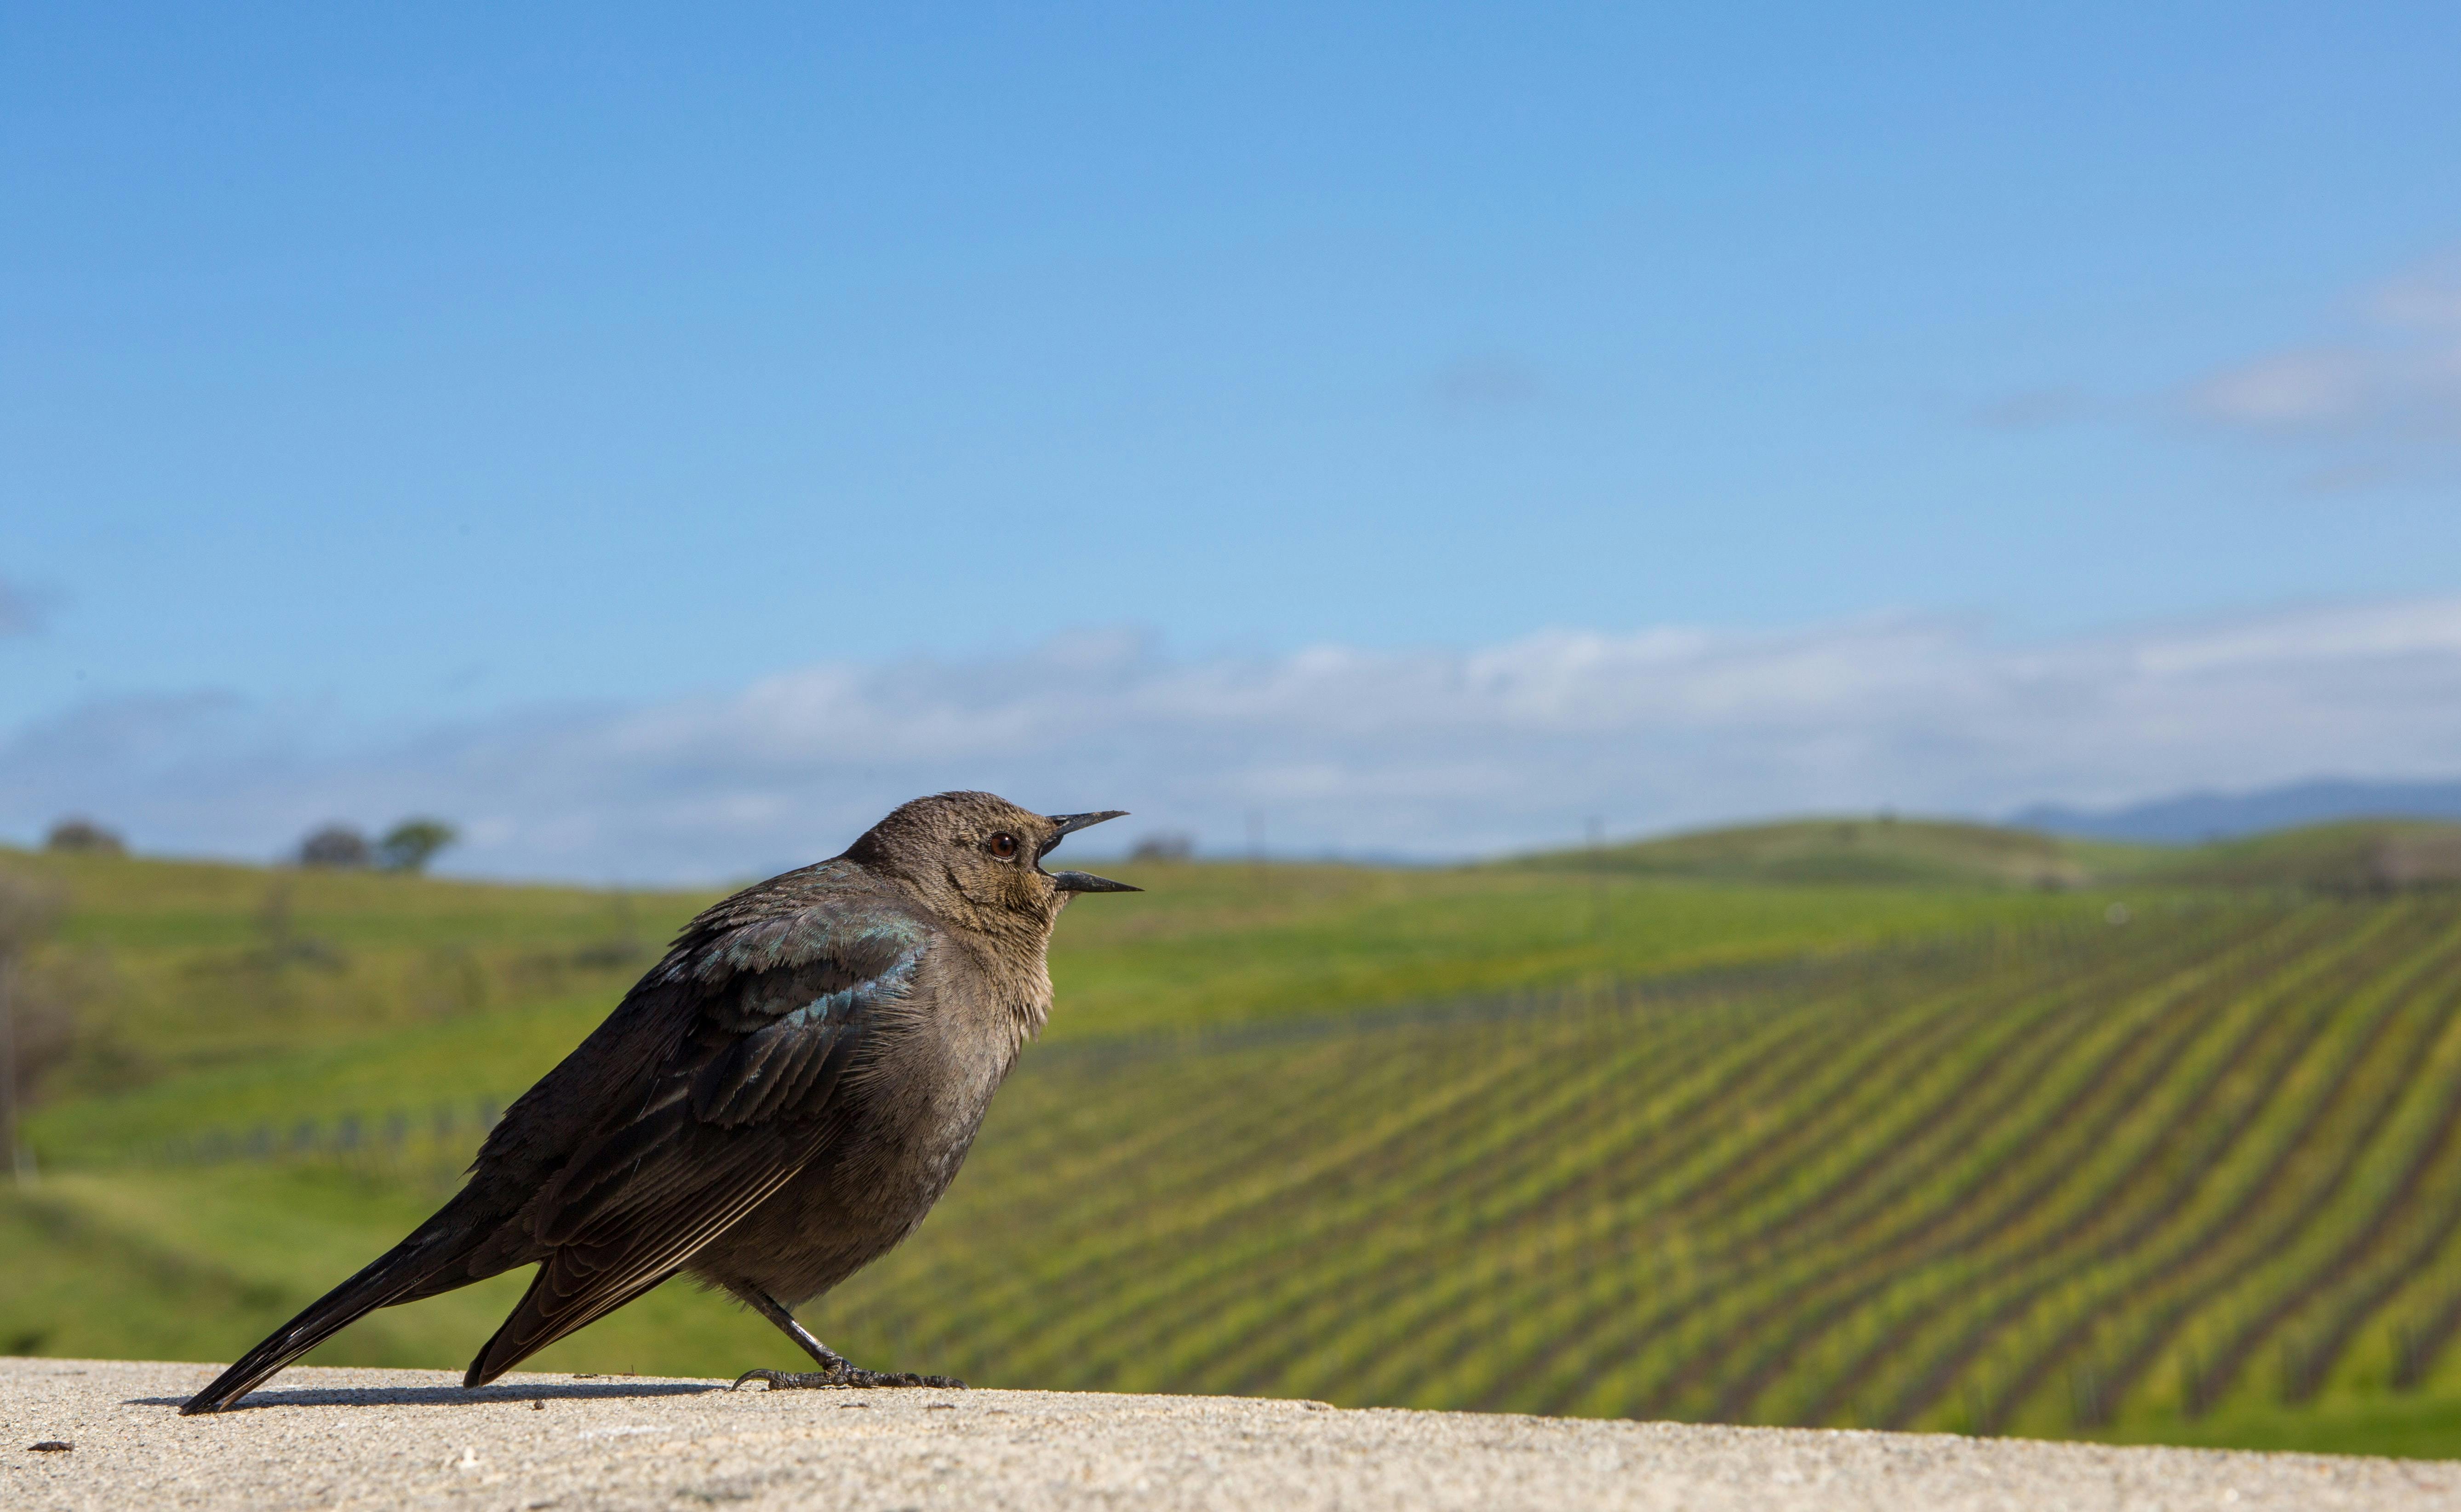 A bird singing with a vineyard in the background